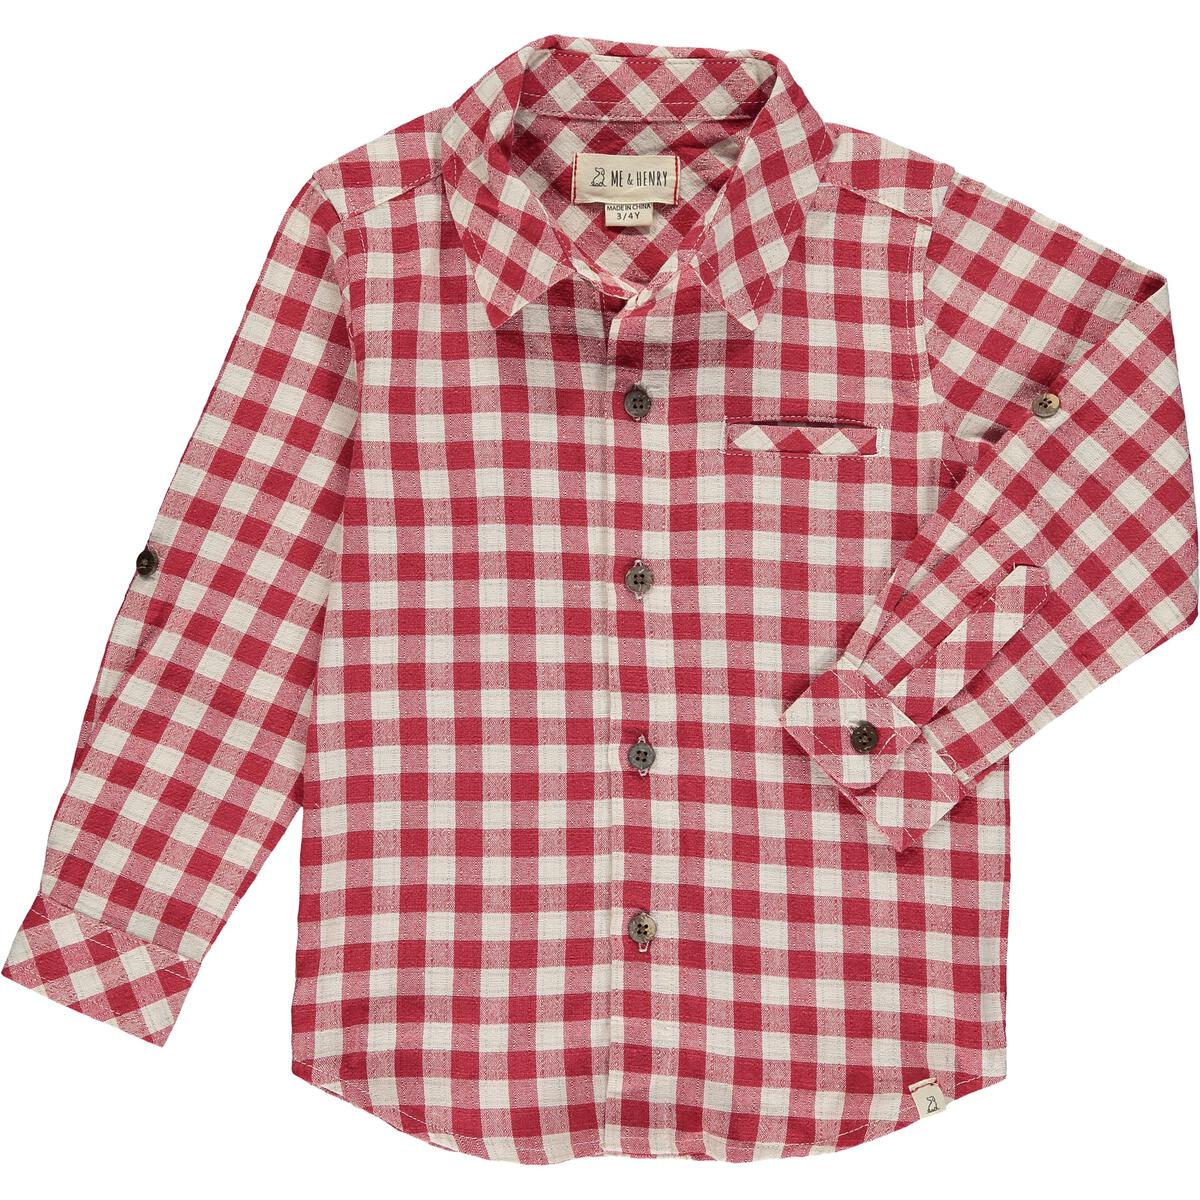 red/cream atwood gold plaid woven shirt